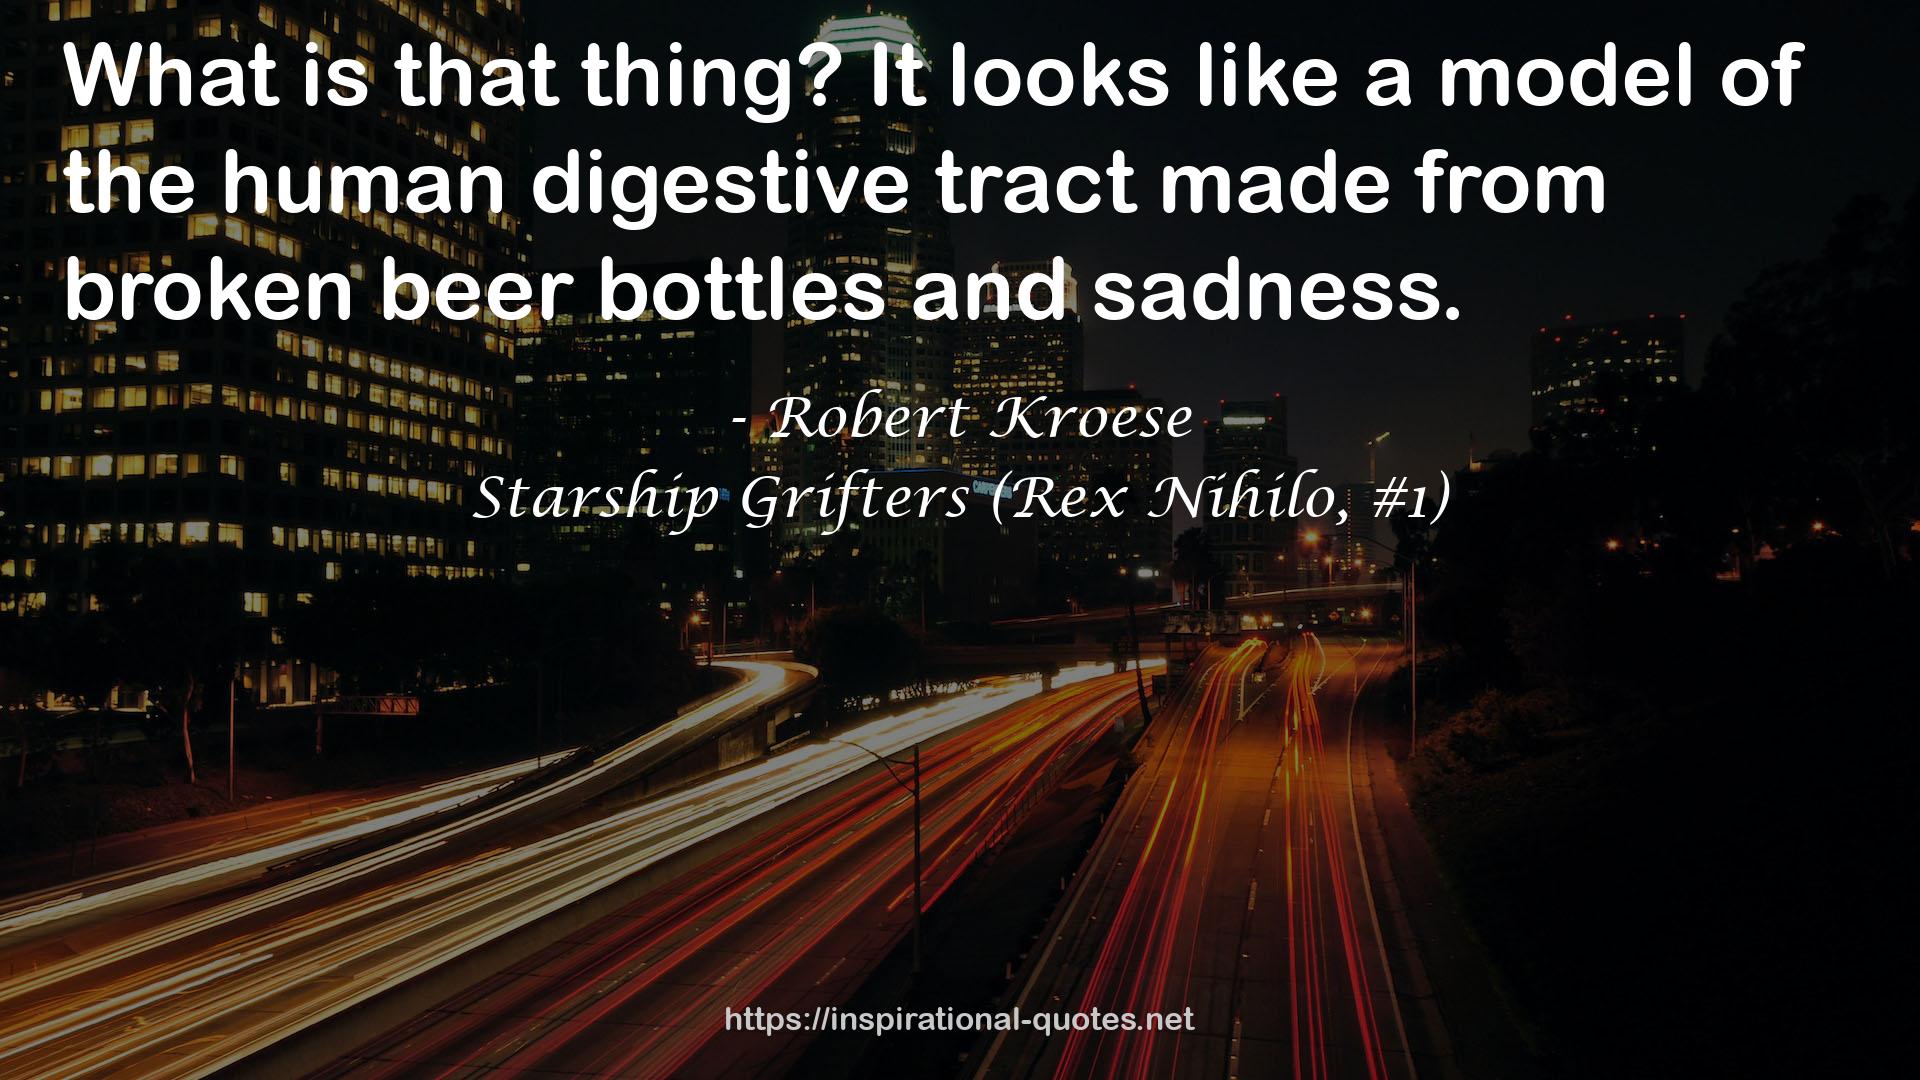 Starship Grifters (Rex Nihilo, #1) QUOTES